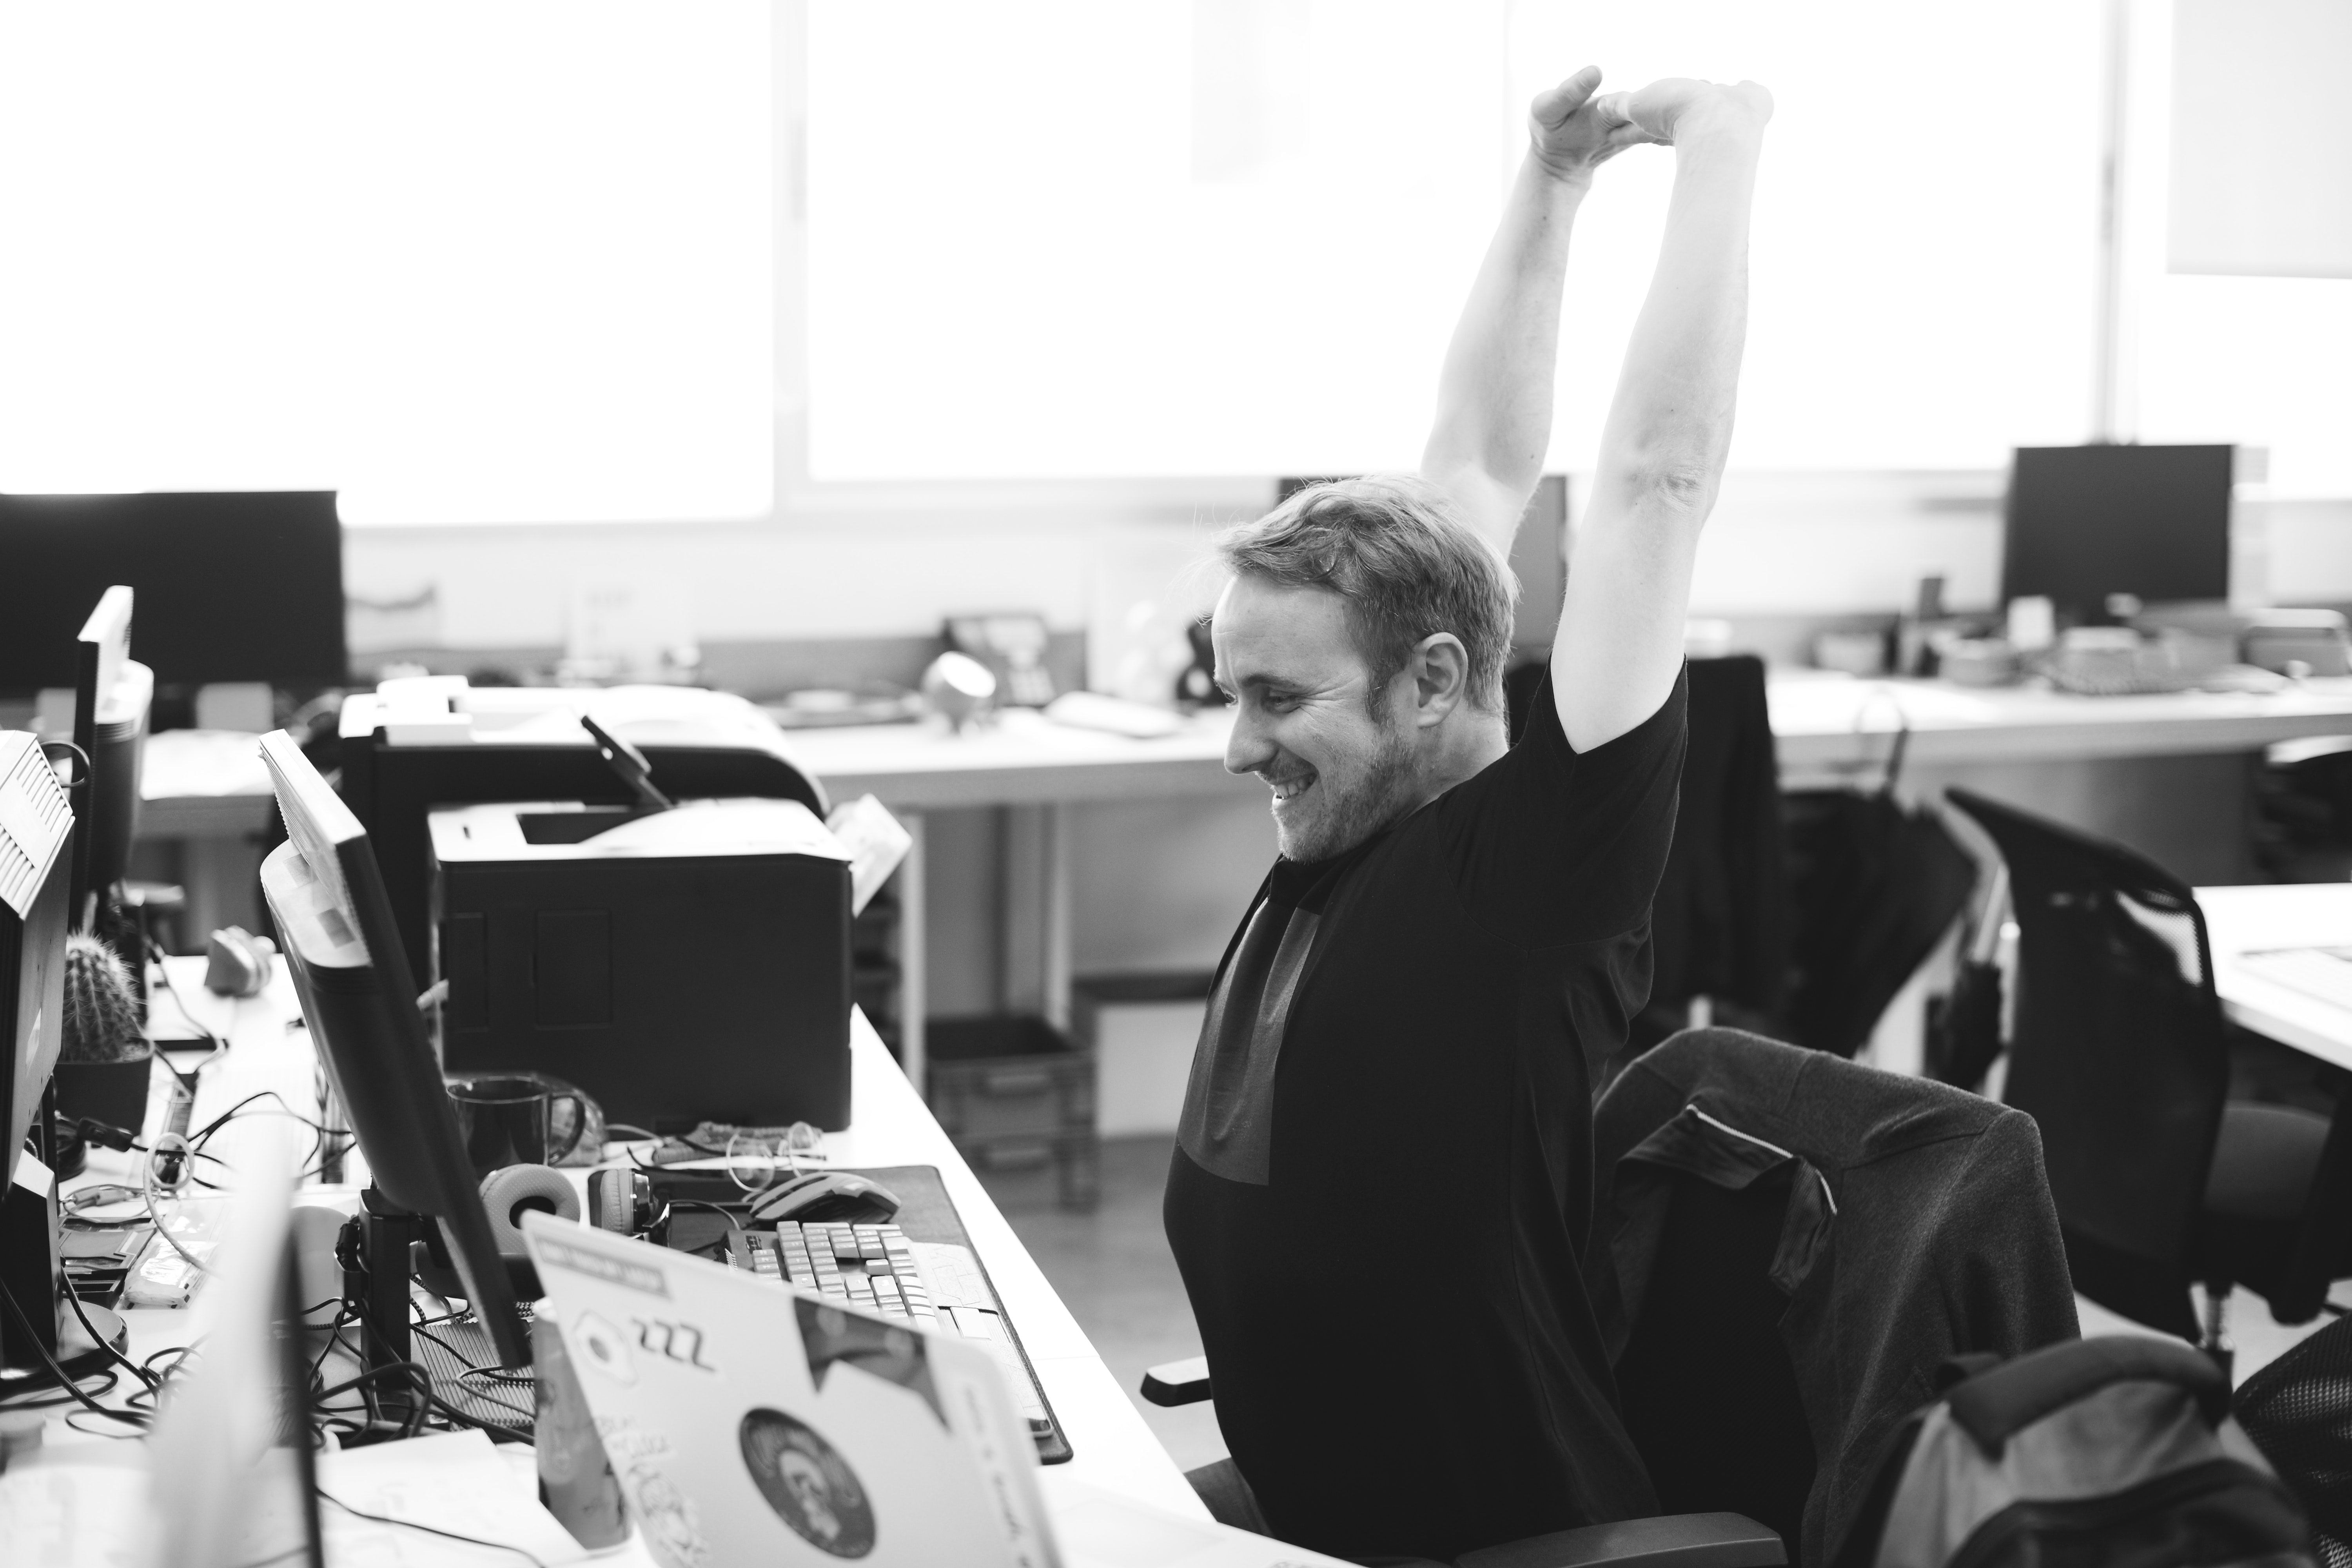 Exercises To Do At Work For An Energy Boost